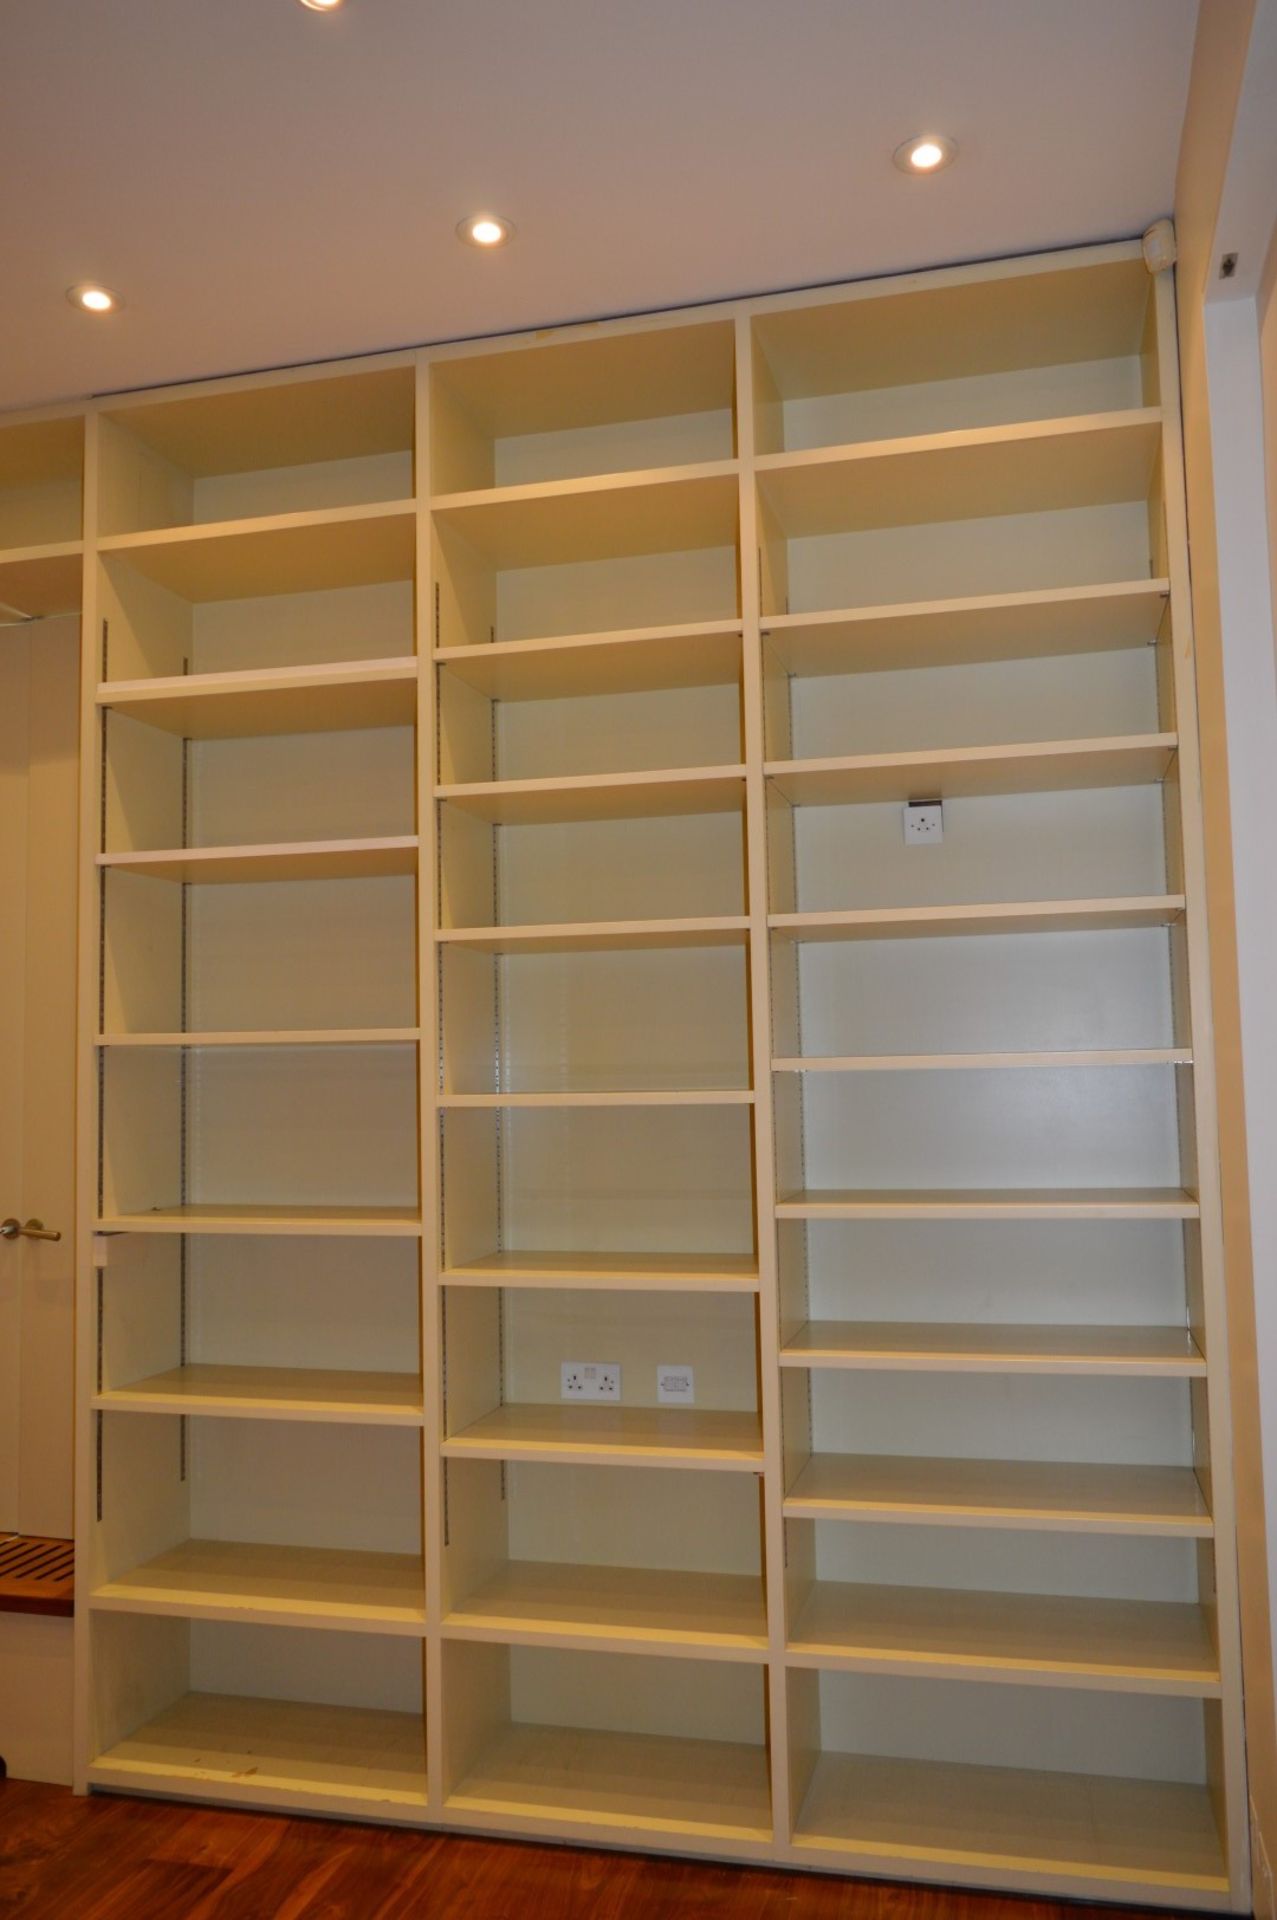 1 x Office Storage Room Including Two Sections of Adjustable Storage Shelvings and Oak Sideboard - Image 4 of 18